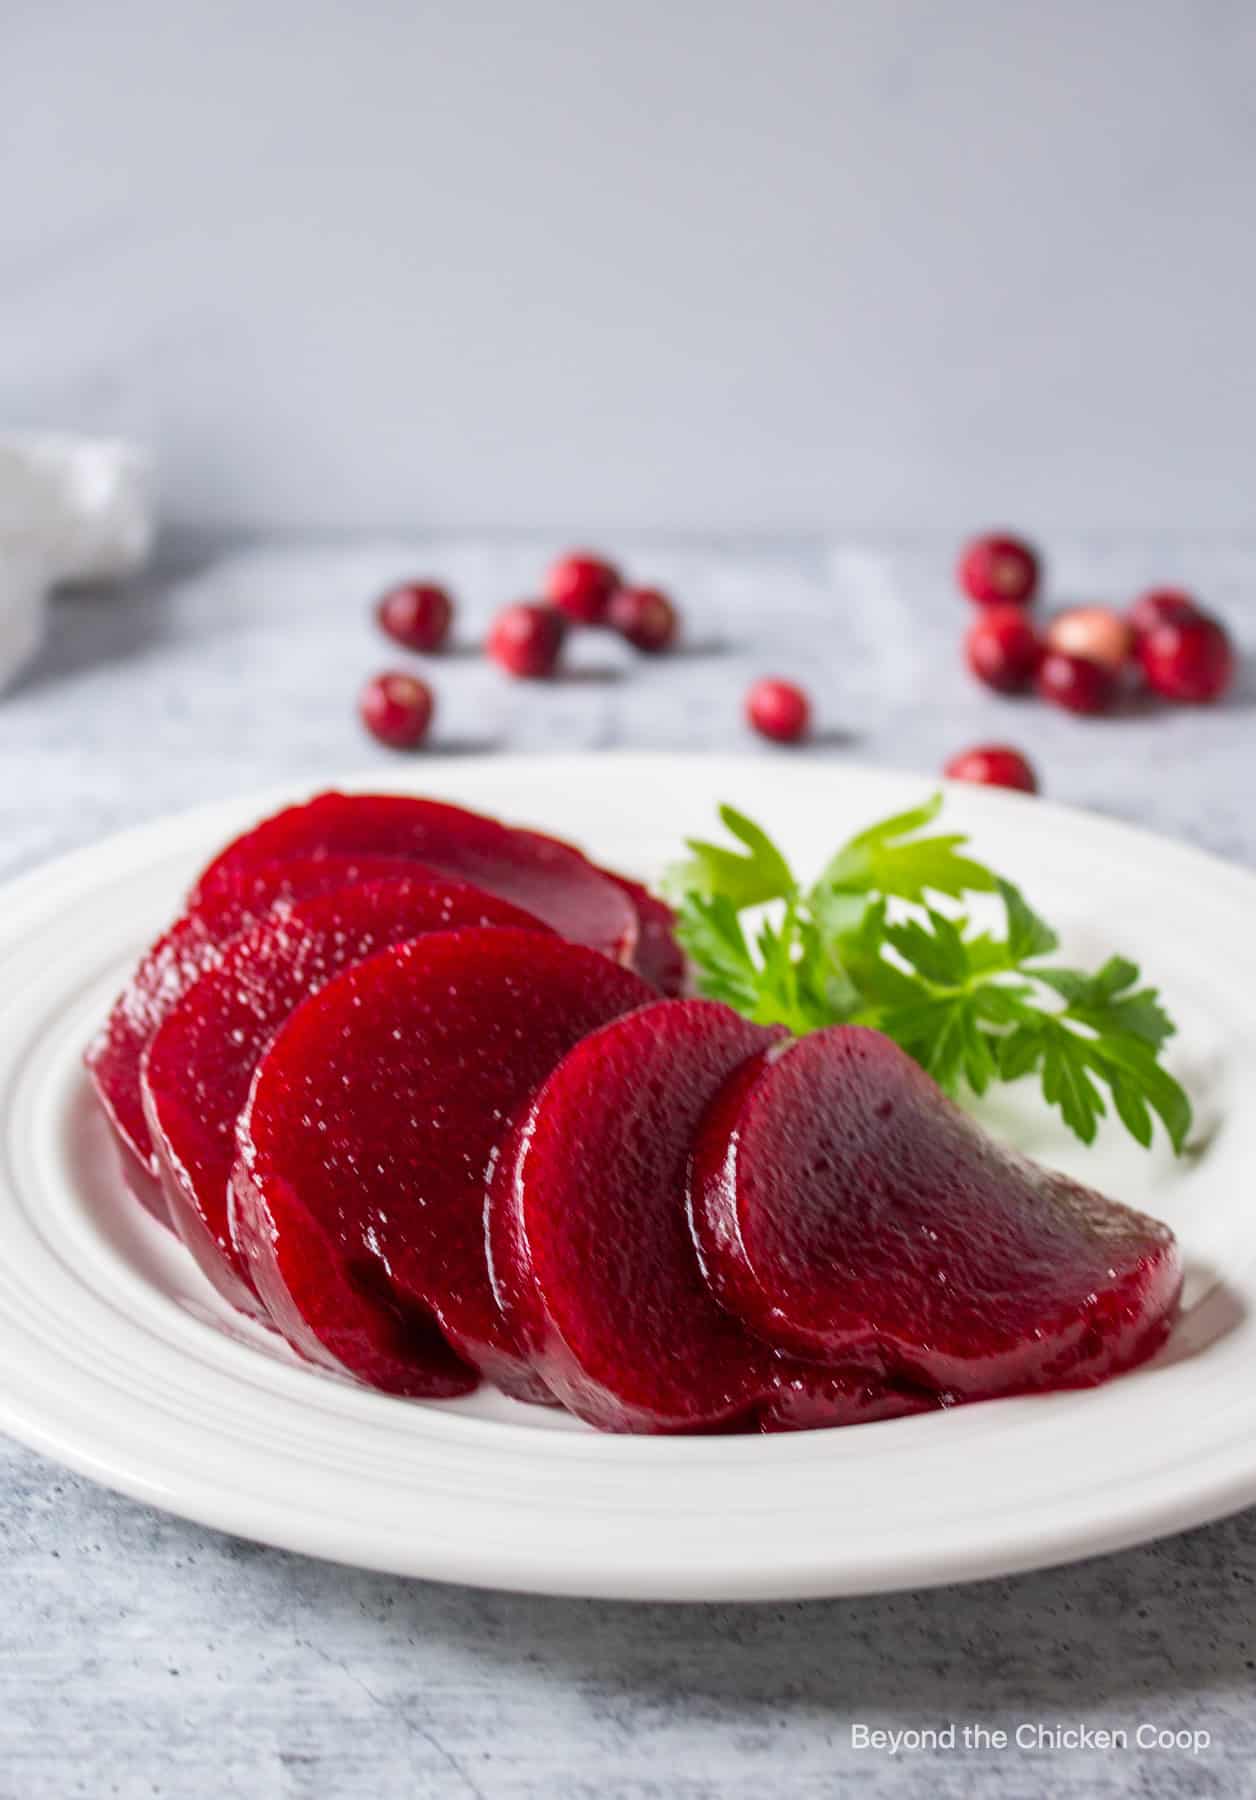 Slices of cranberry sauce on a plate.